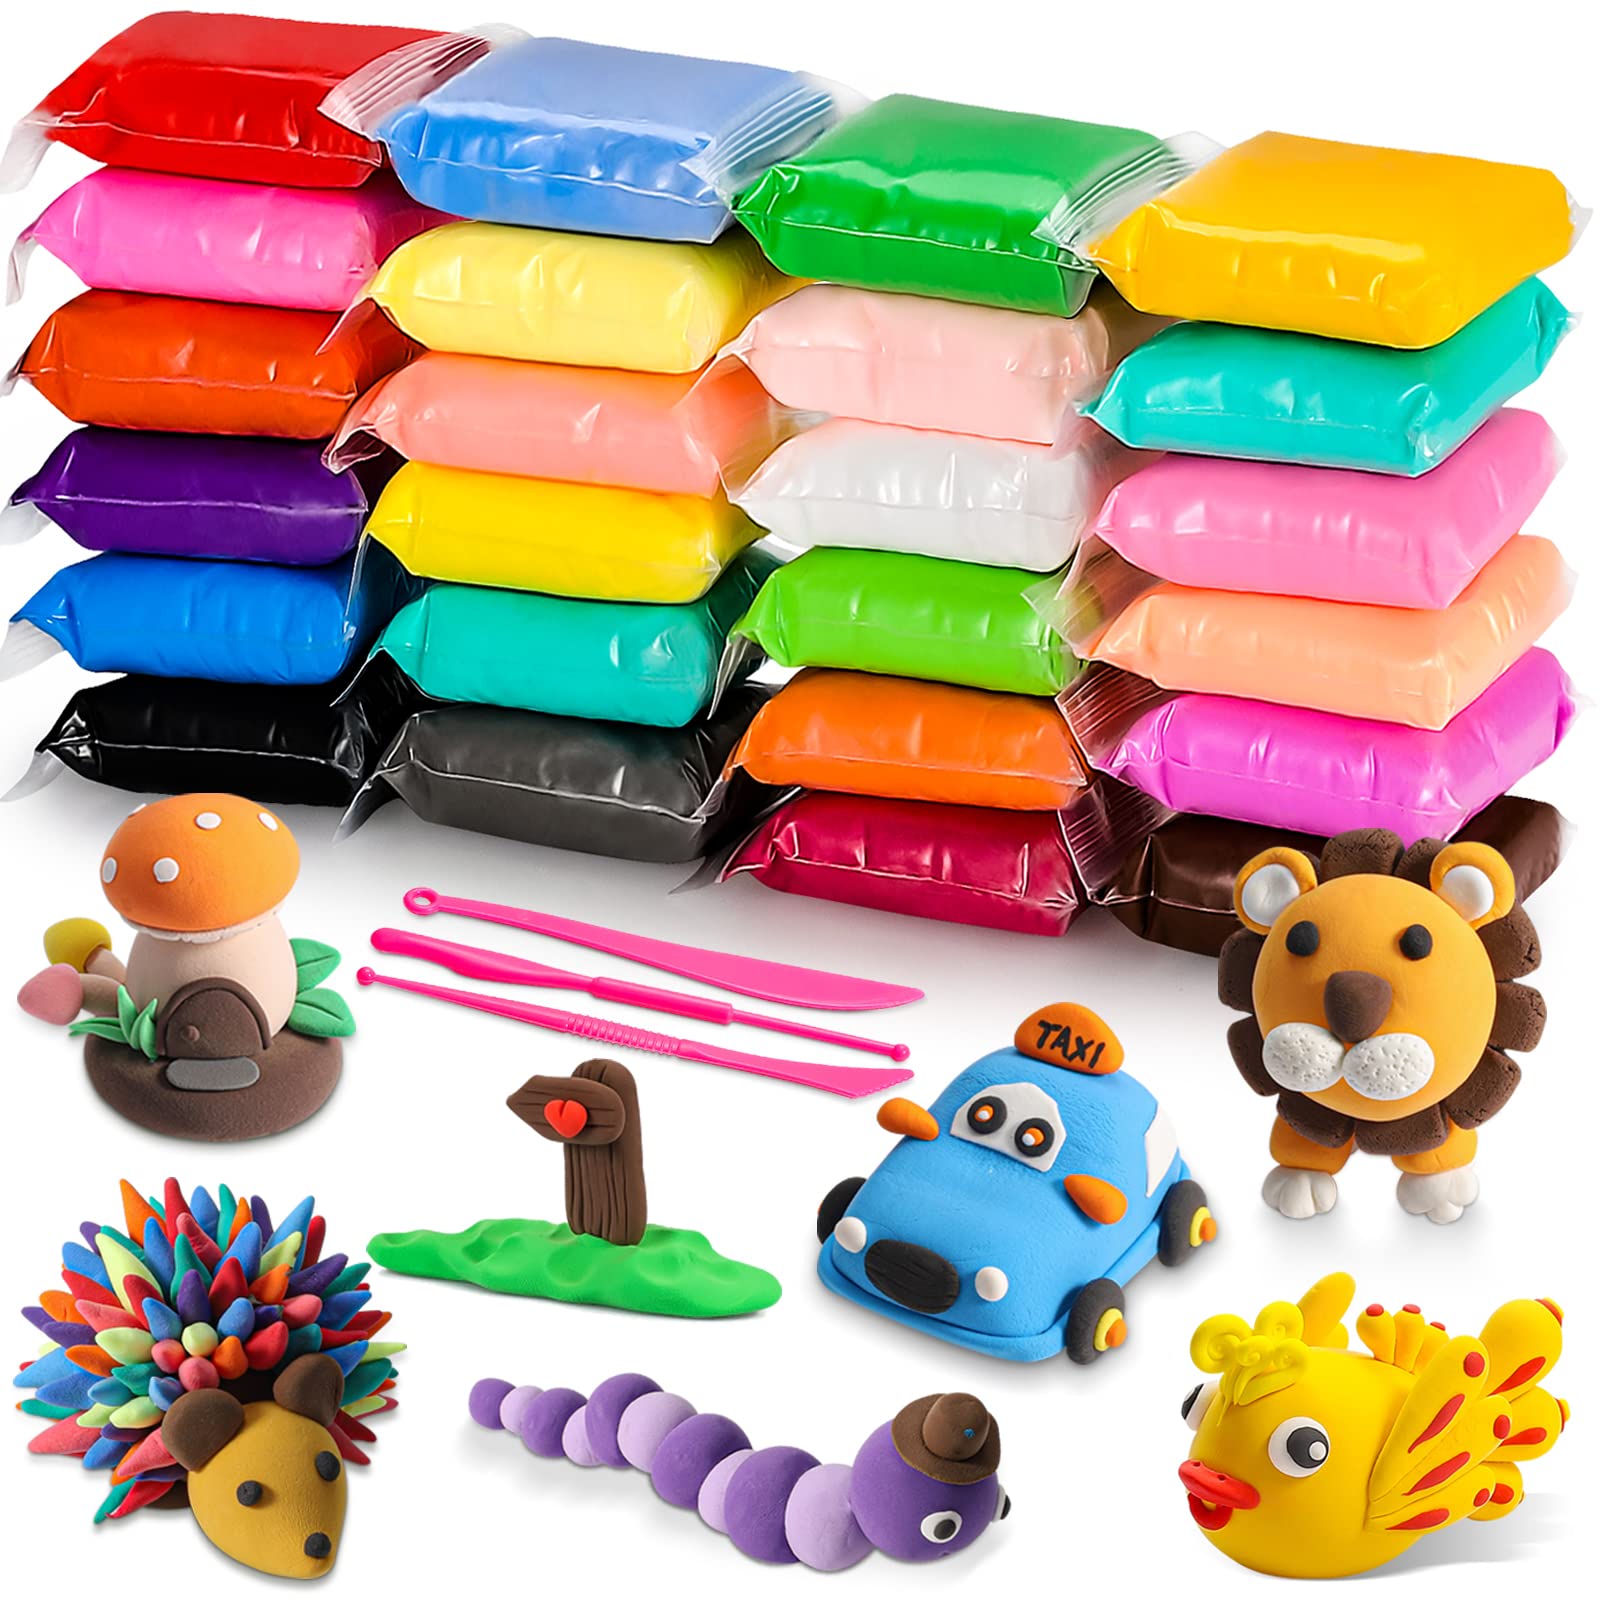 CiaraQ Modeling Clay Kit - 24 Colors Air Dry Ultra Light Clay Safe &  Non-Toxic Great Gift for Kids.